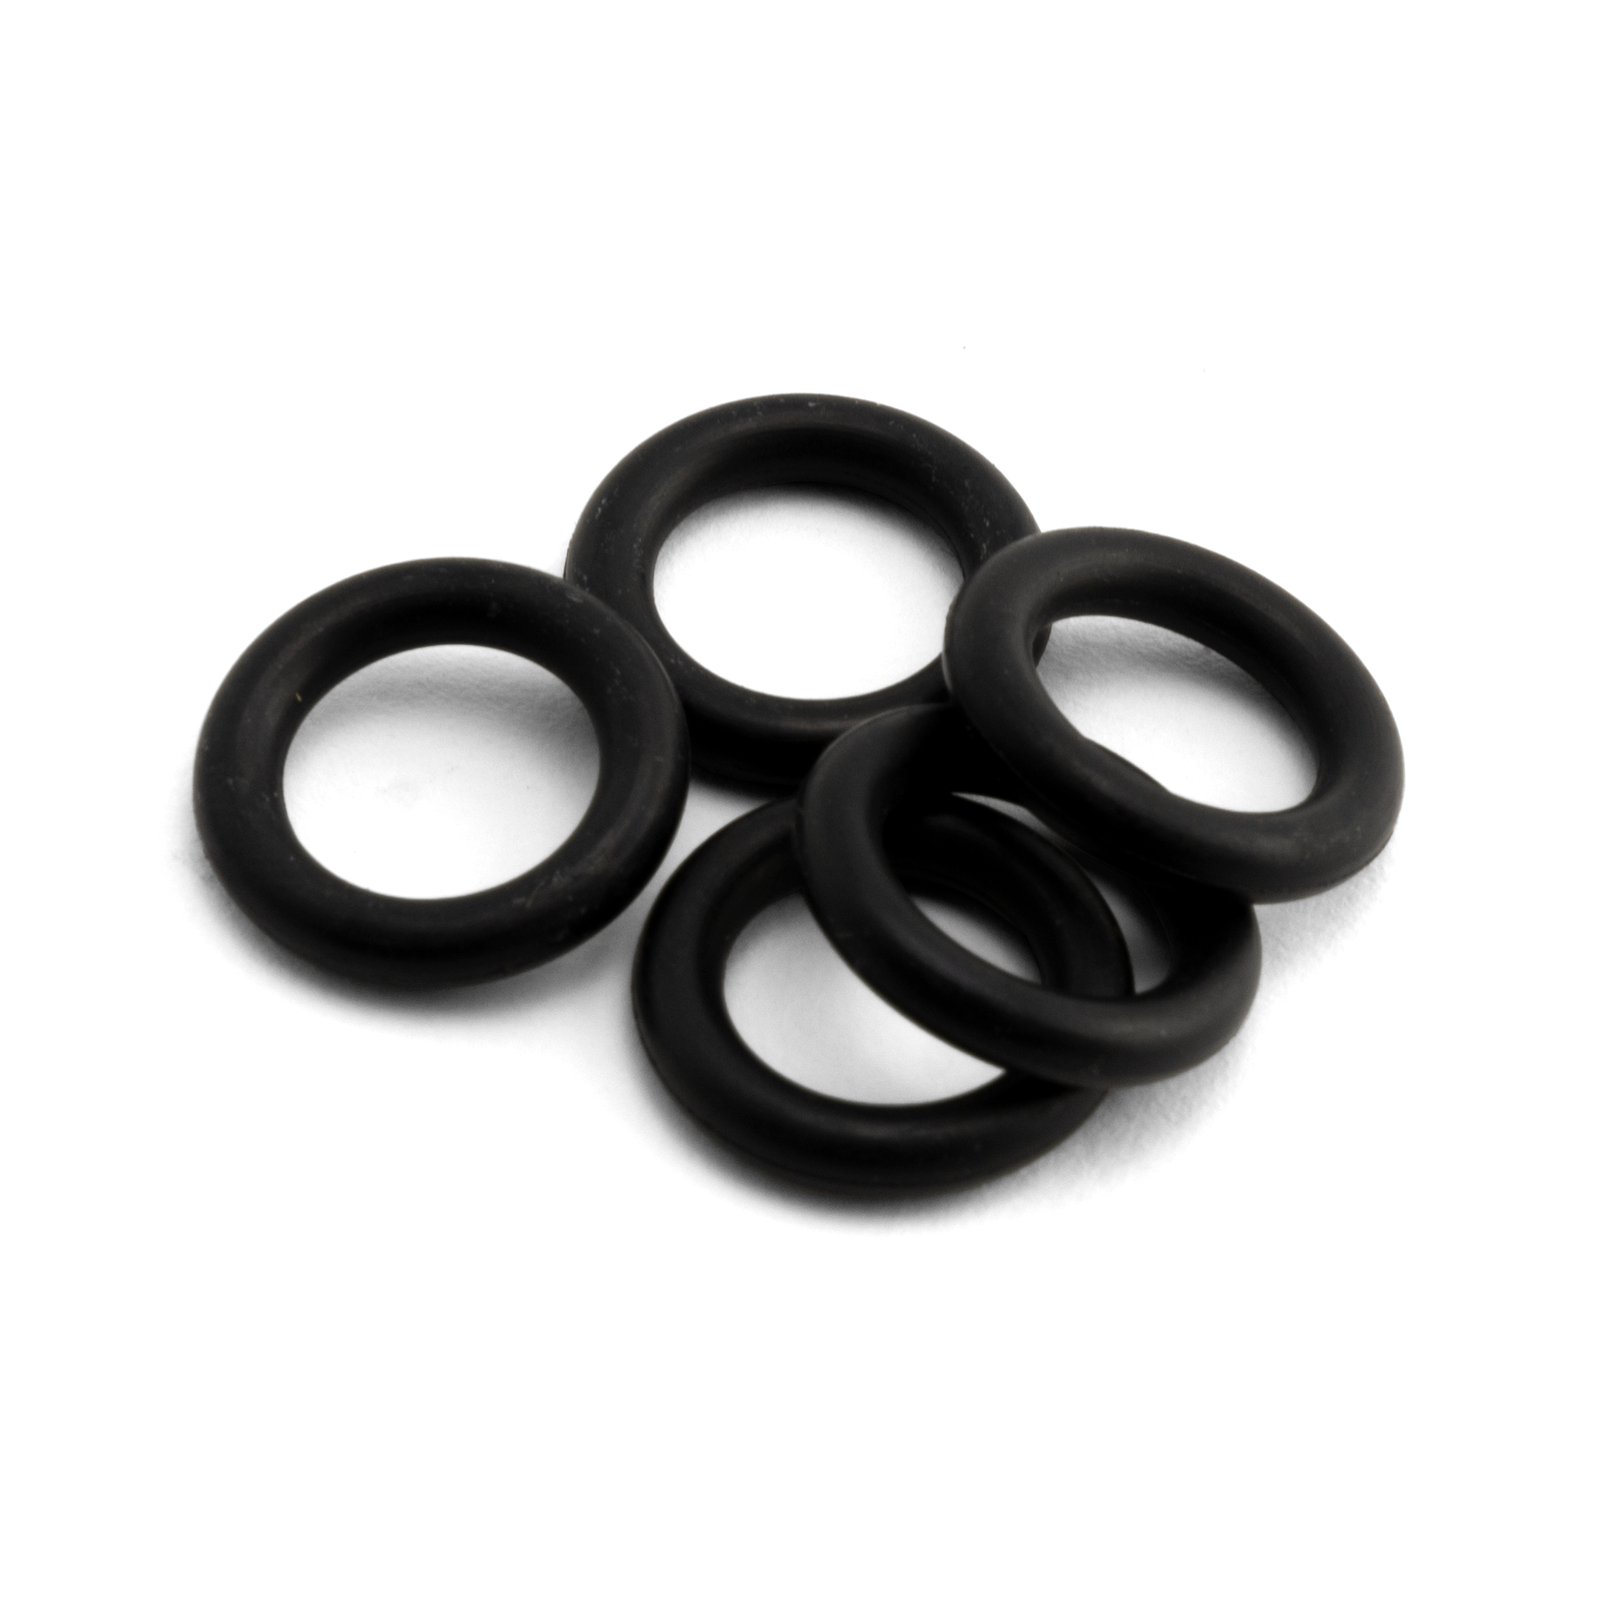 Solid Stainless Steel Metal O-Ring/O Ring - Size XL - 5 Pack